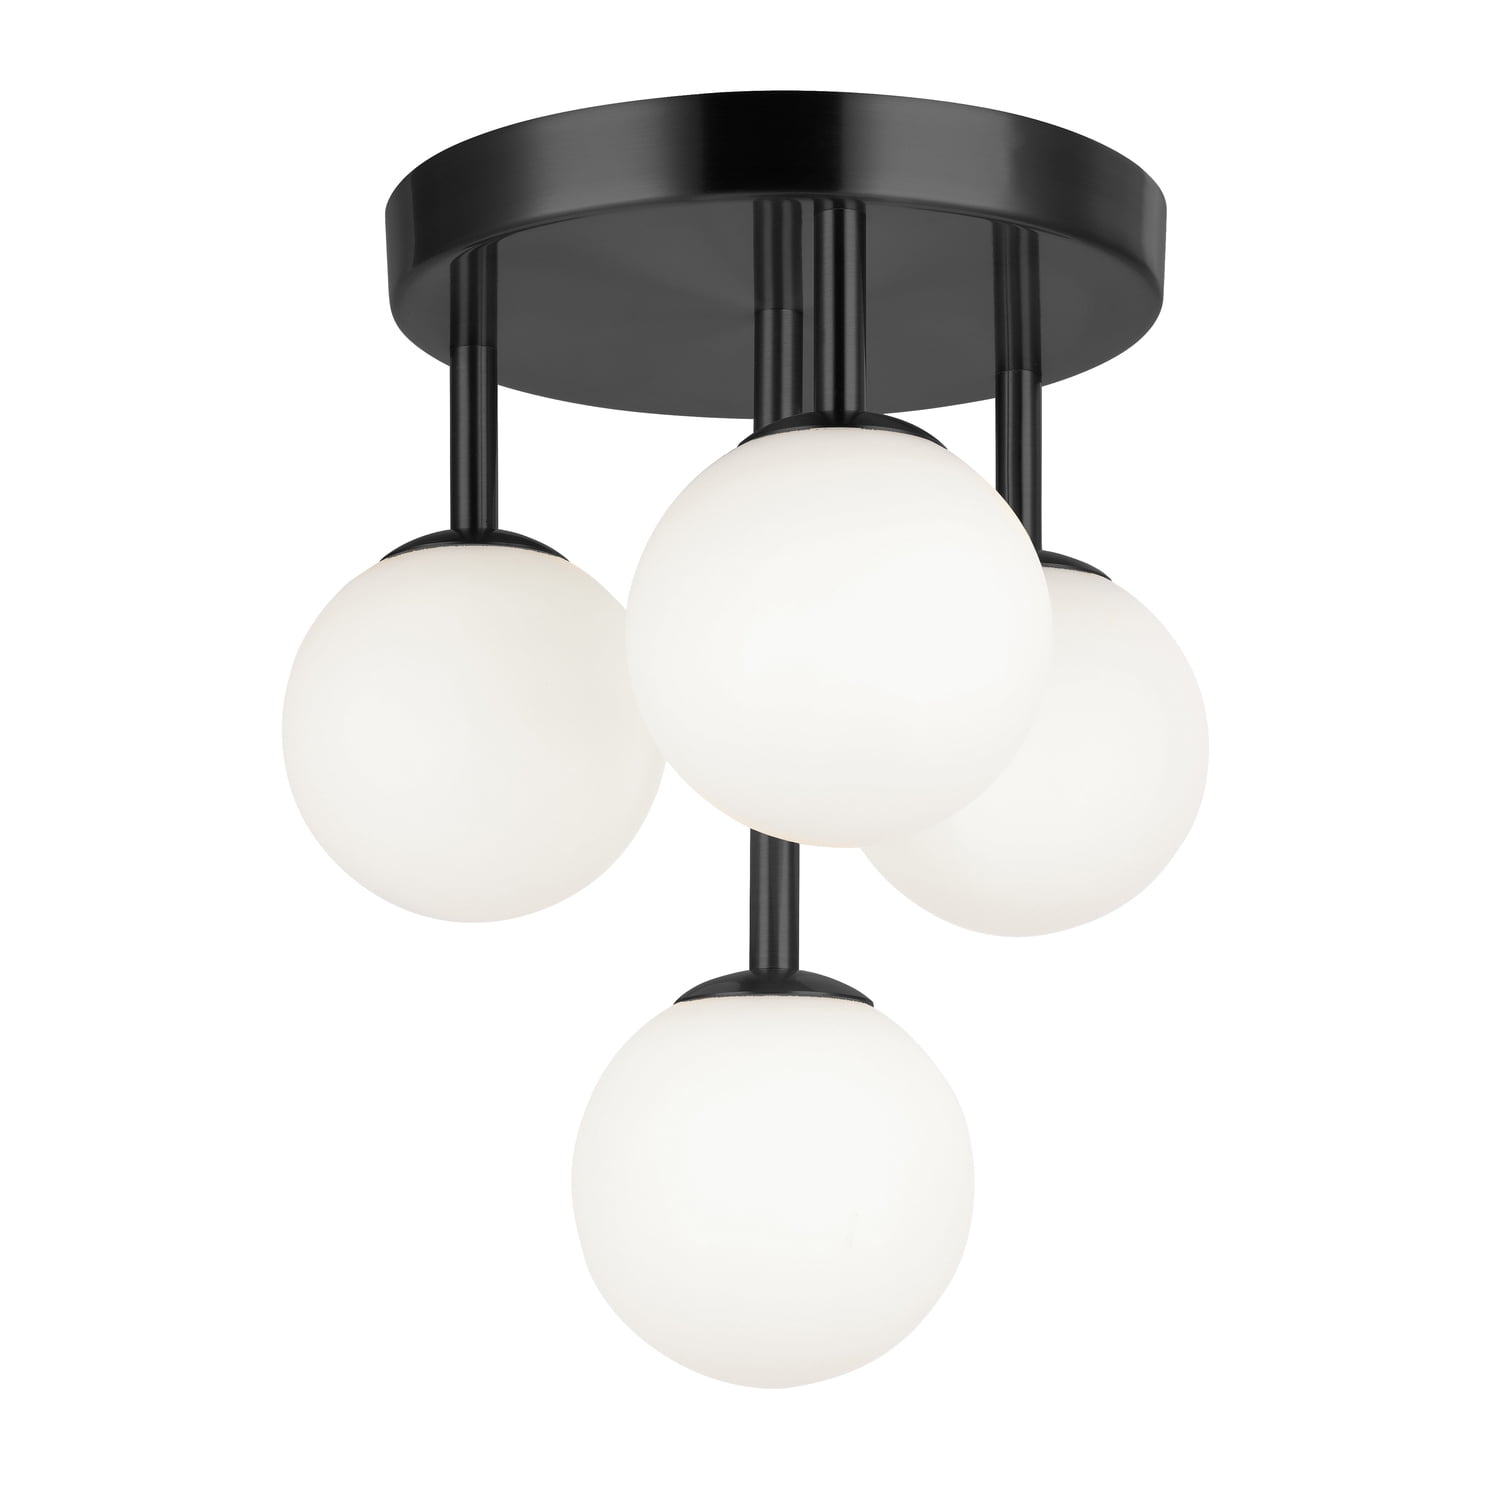 Picture of Dainolite MGL-94FH-MB 11 in. Megallan 4 Light Flush Mount, Matte Black with White Opal Glass